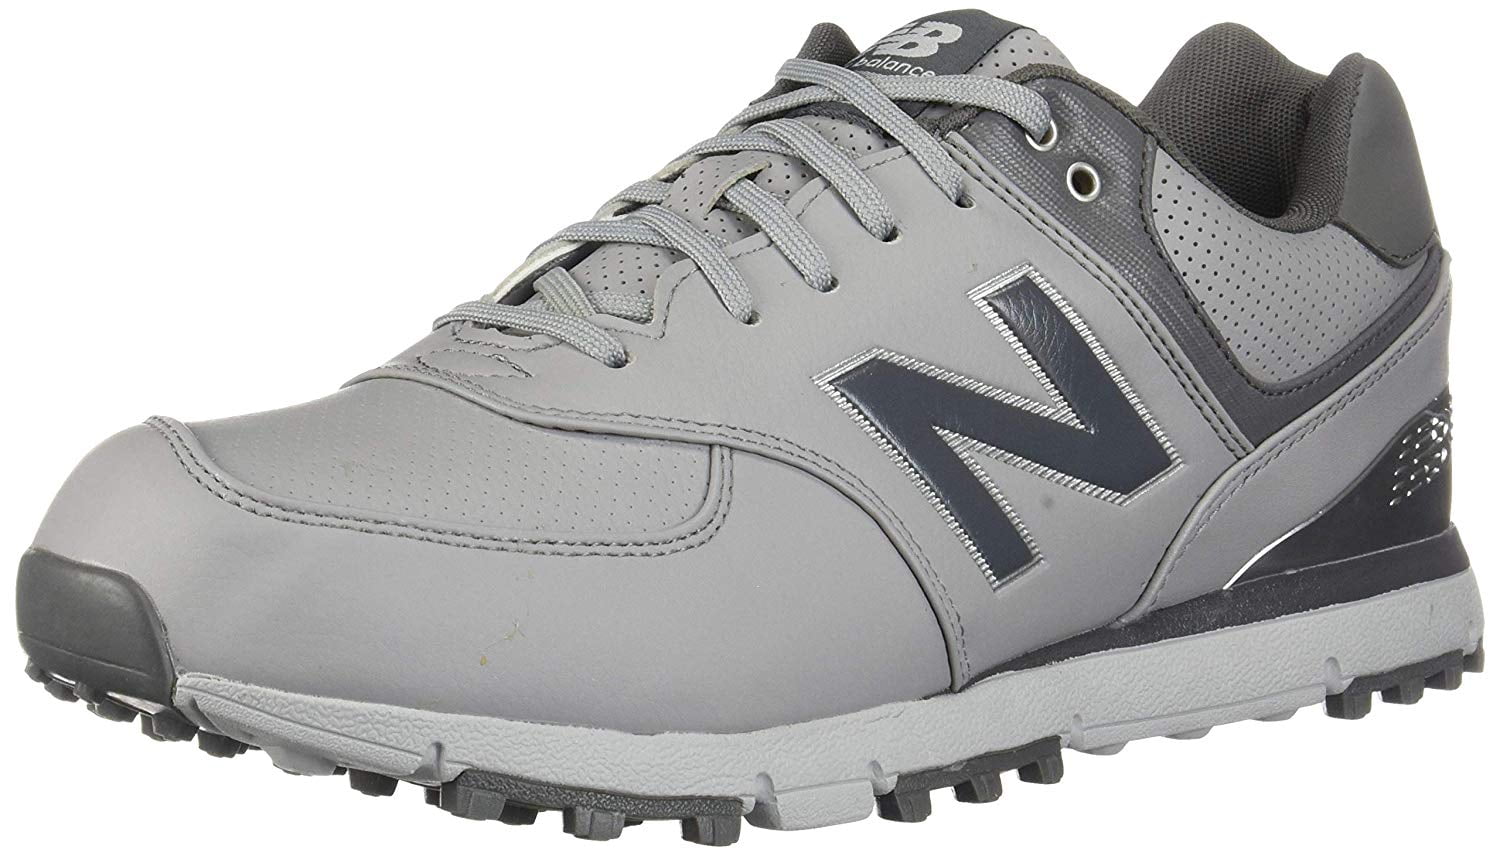 new balance 450 v3 men's lightweight running shoes sneakers athletic